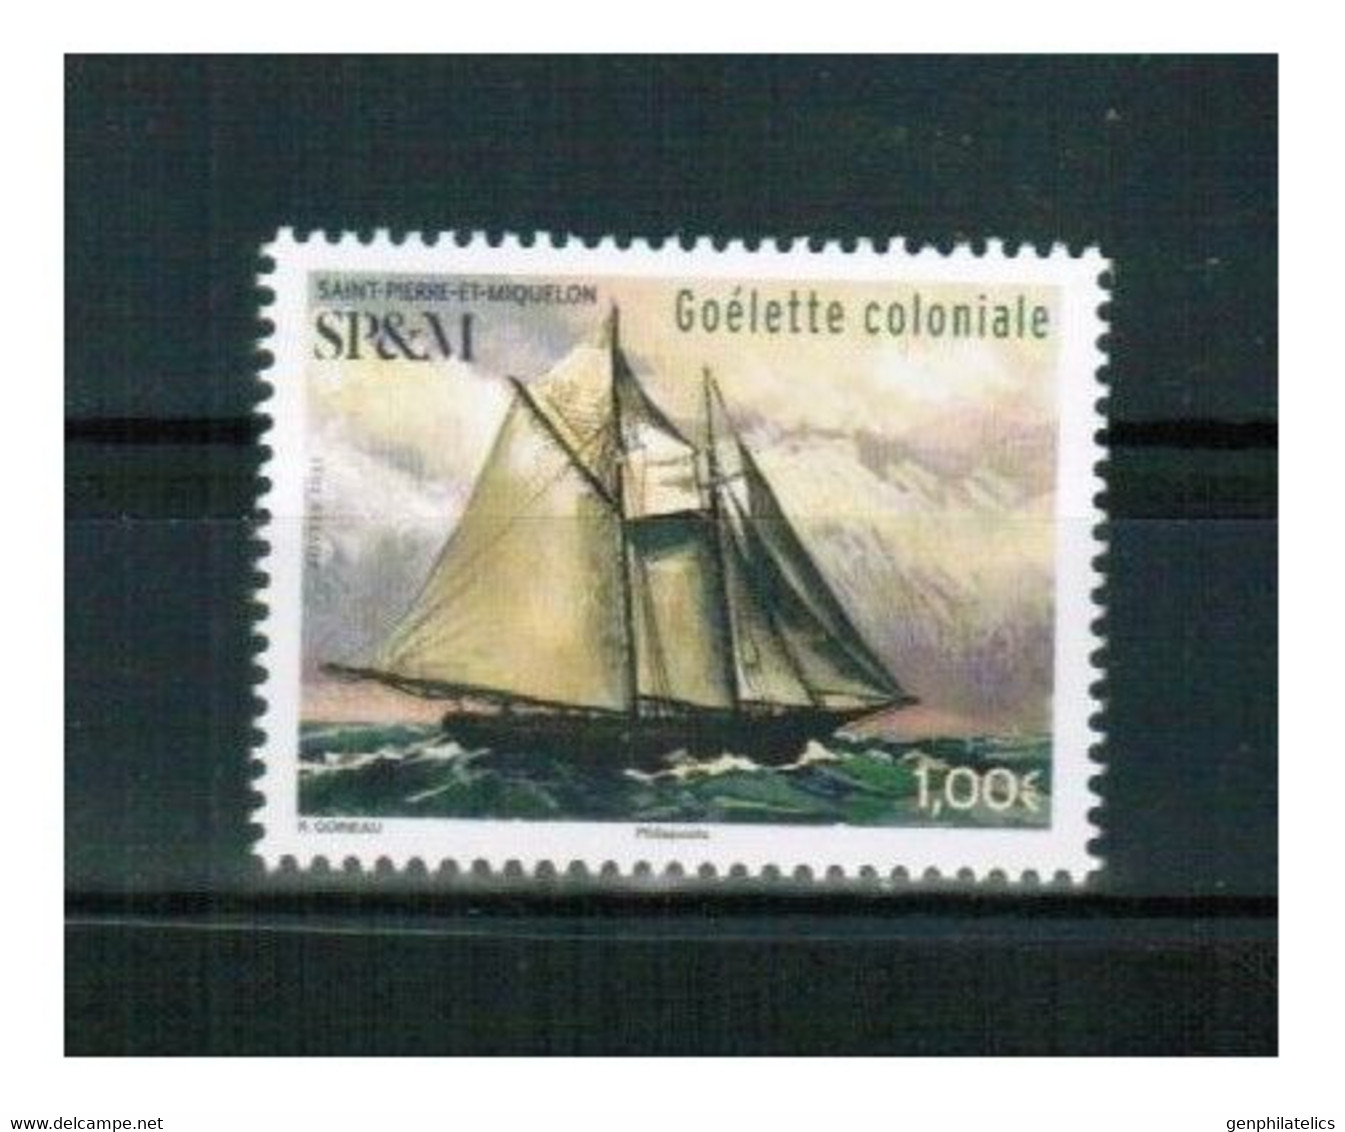 SP&M 2021 FAUNA Vehicles SHIP - Fine Stamp MNH - Unused Stamps